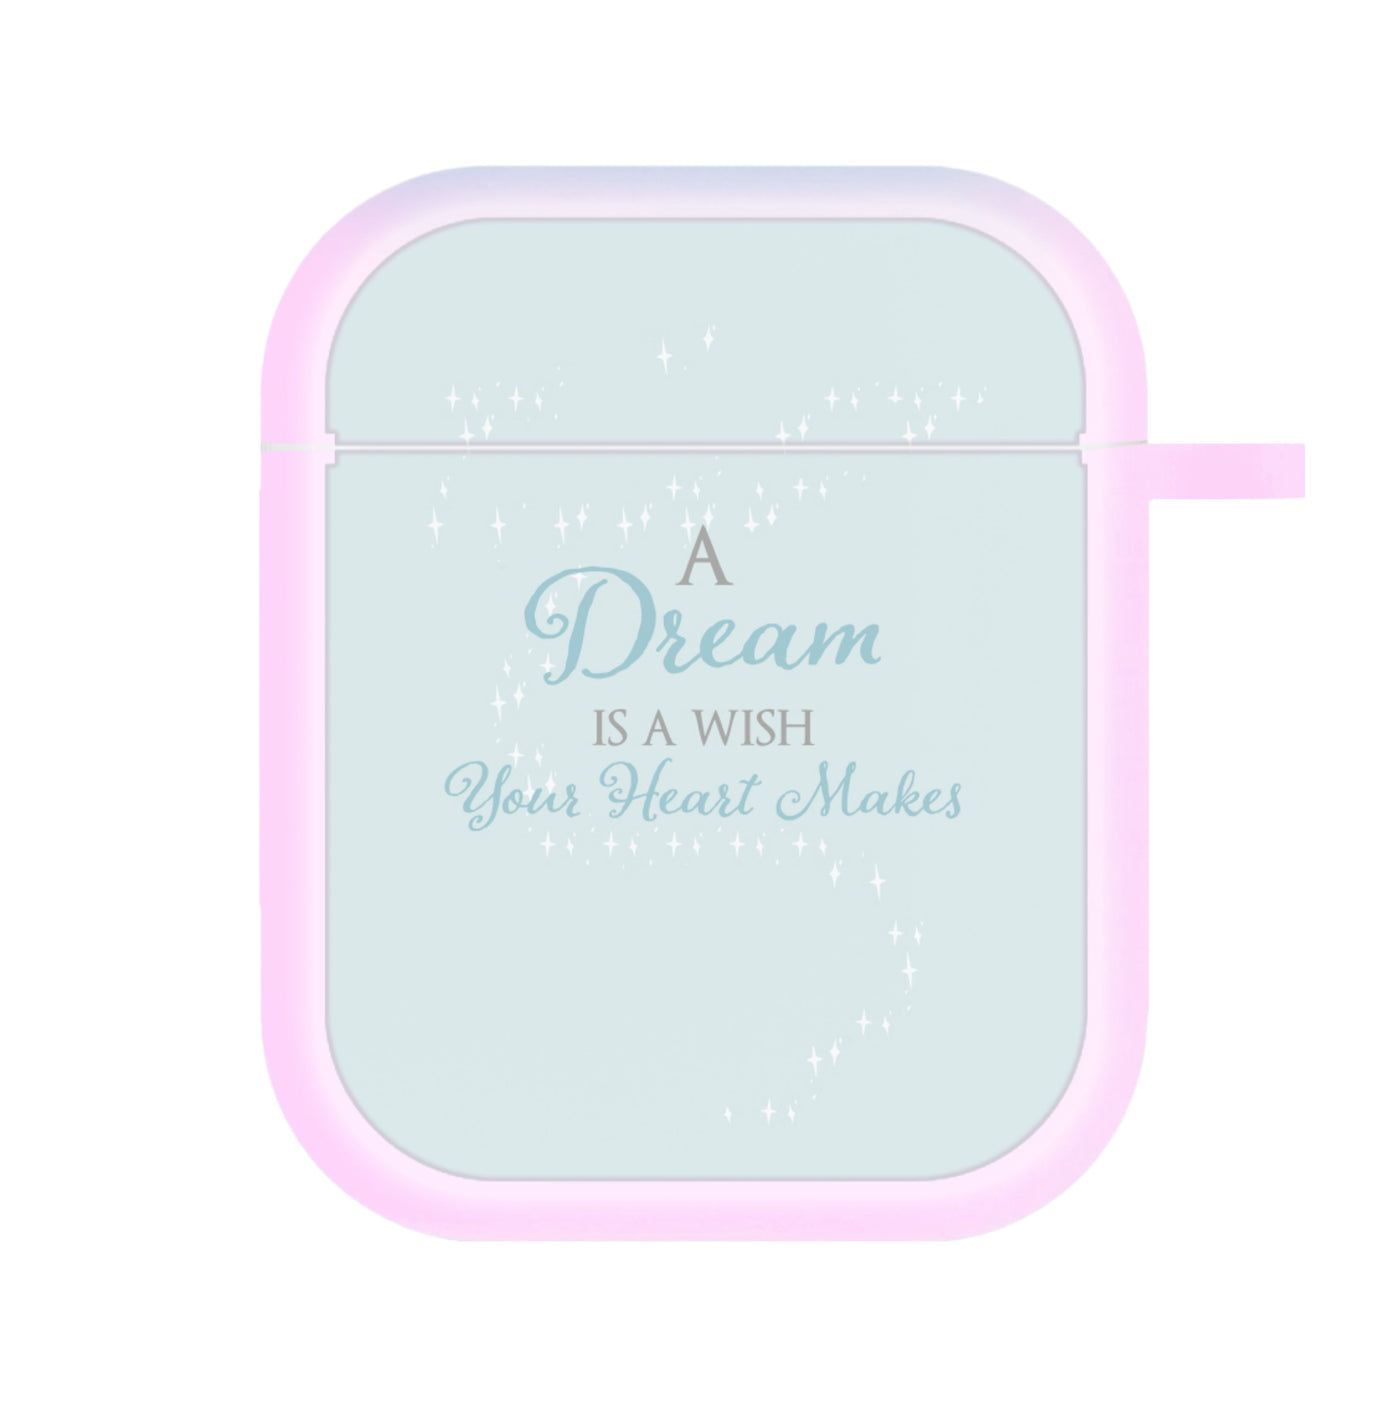 A Dream Is A Wish Your Heart Makes - Disney AirPods Case